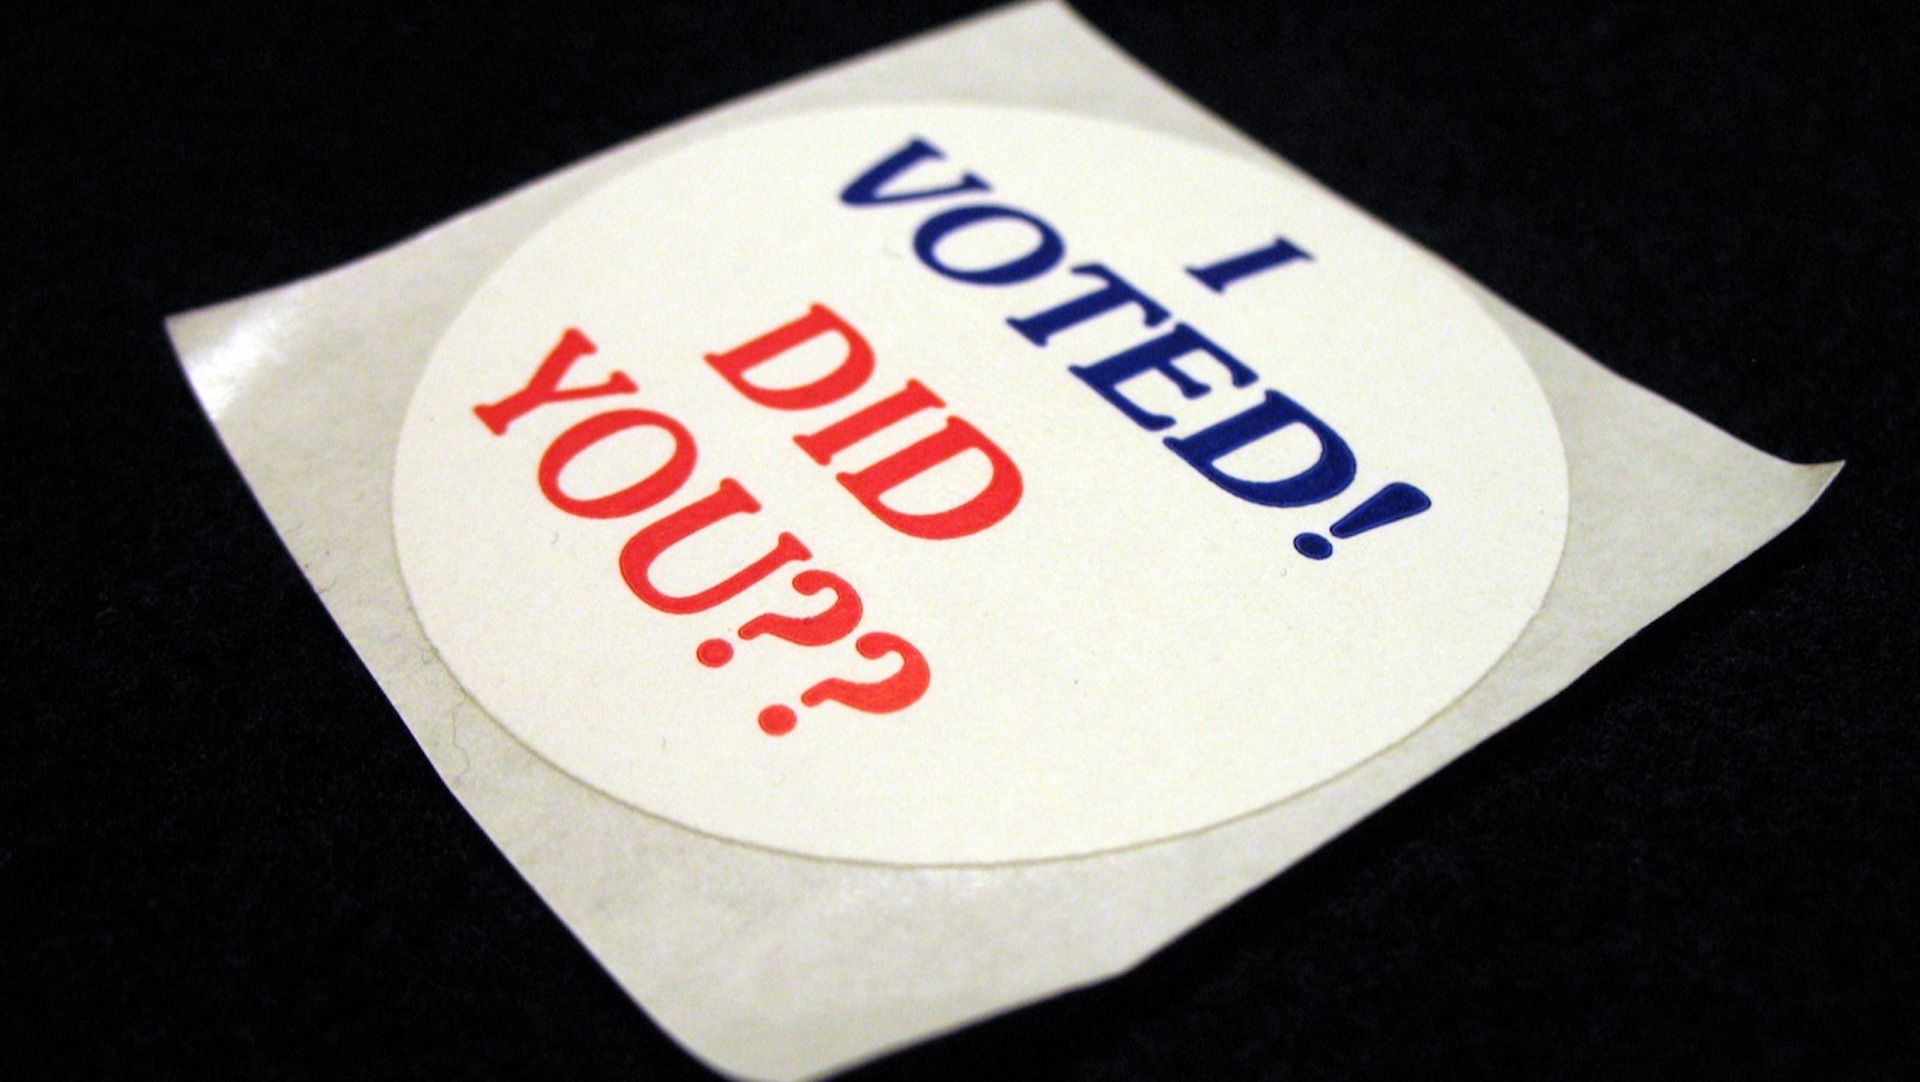 A voting sticker says "I voted! Did you??"